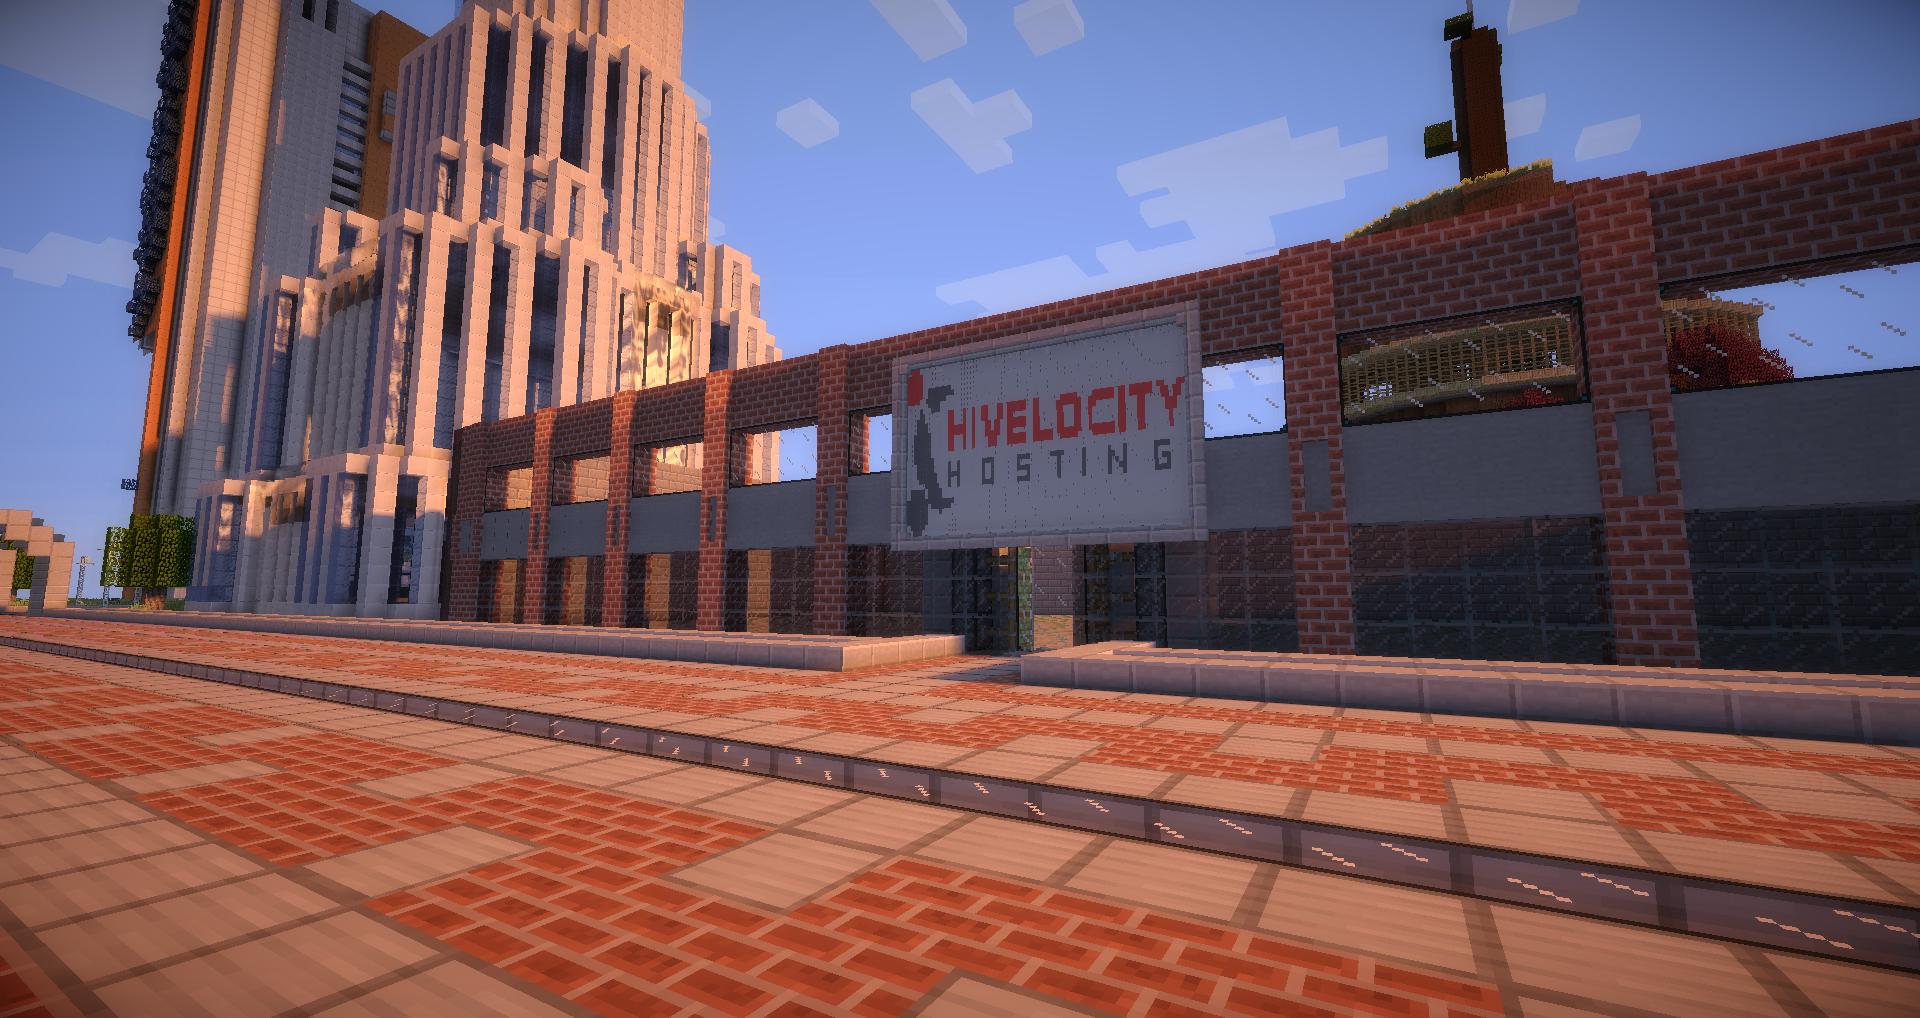 Scene from Minecraft with a sign featuring the Hivelocity logo